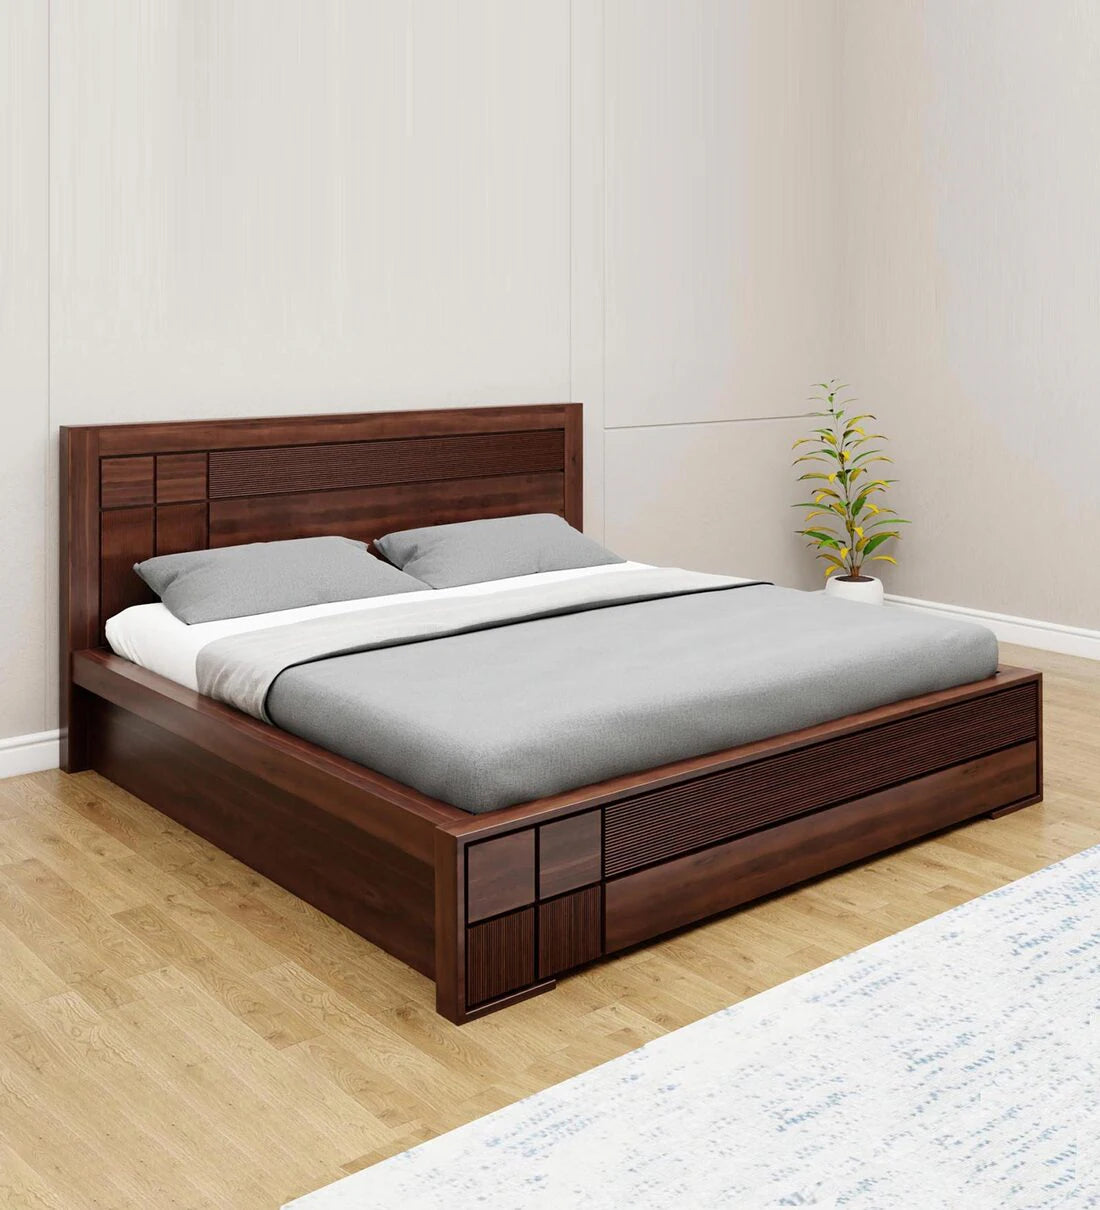 Sheesham Wood King Size Bed in Brown Colour With Hydraulic Storage